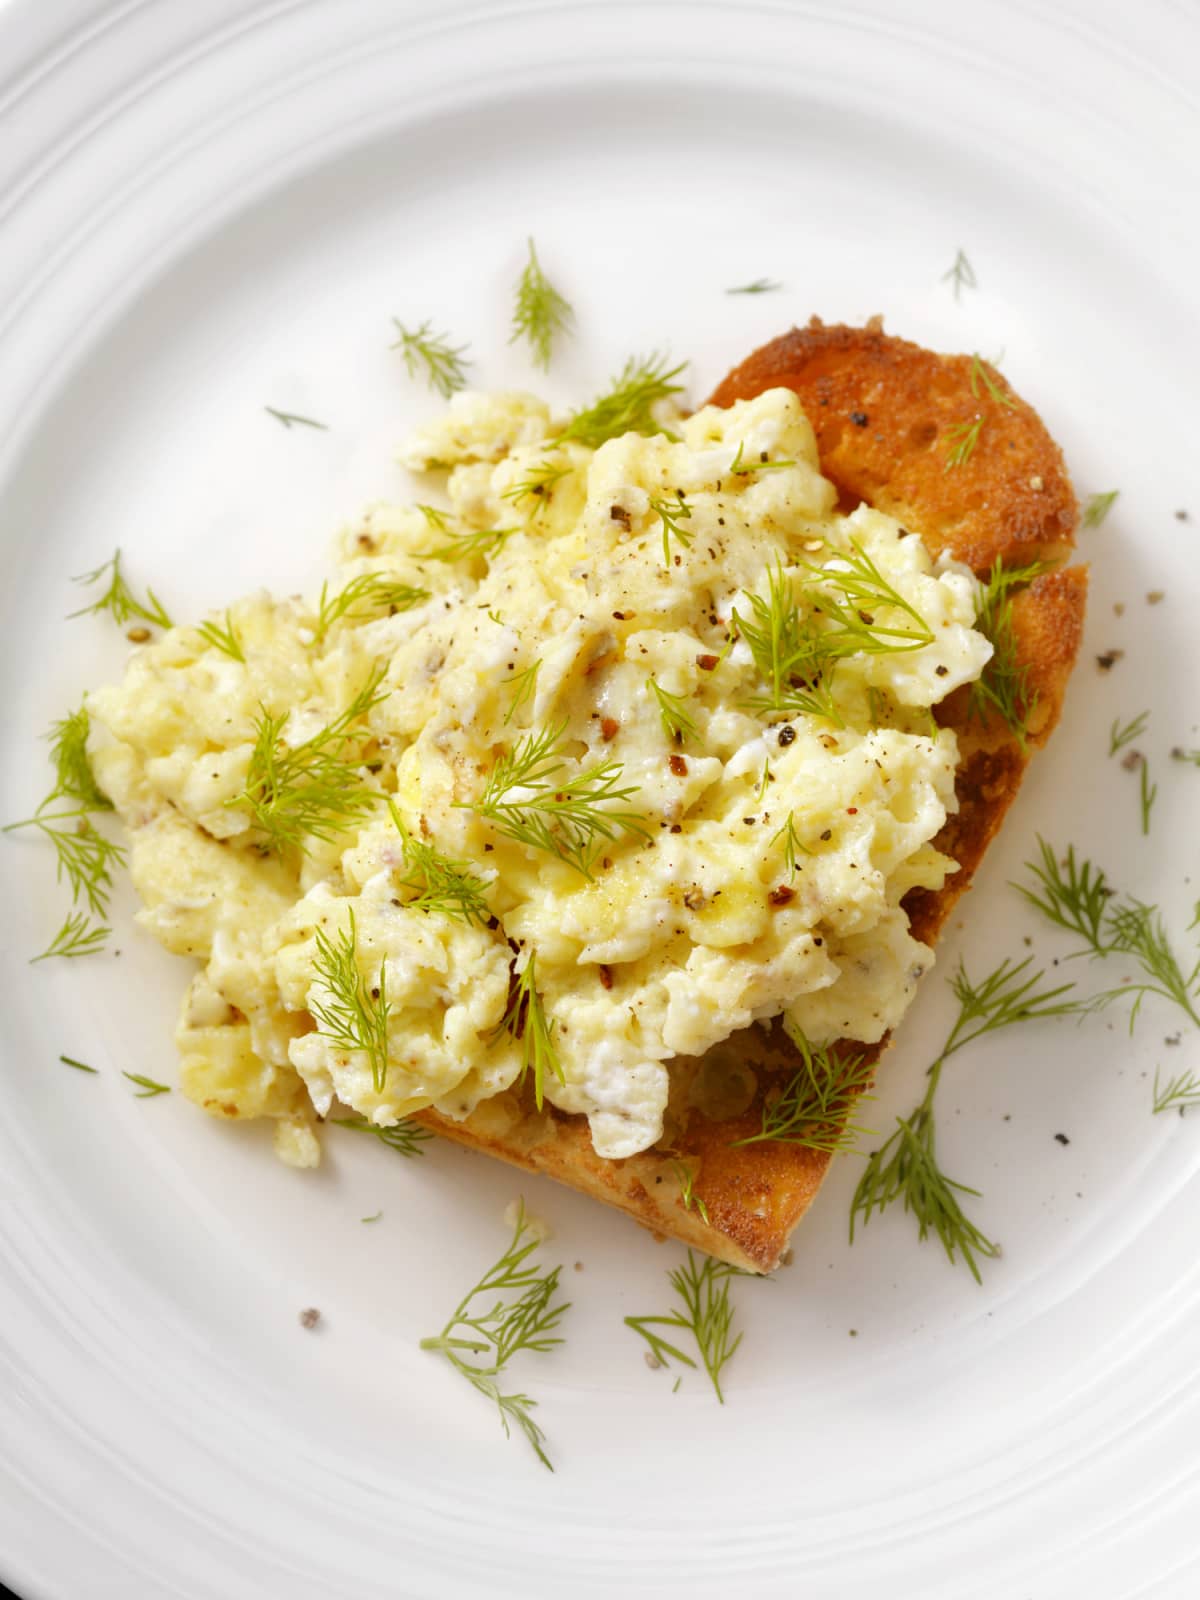 Scrambled eggs on toast garnished with dill and spices.